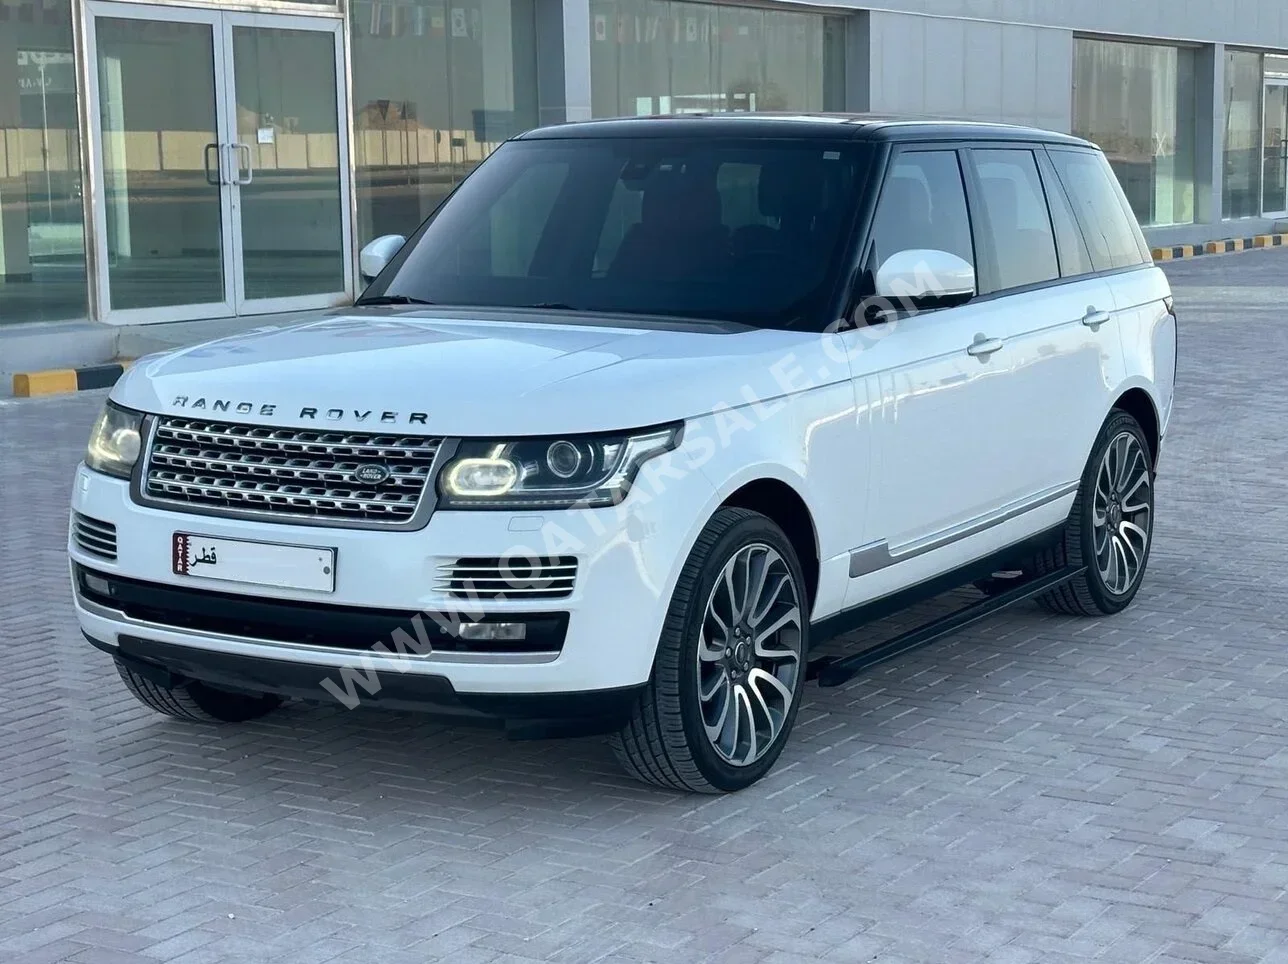 Land Rover  Range Rover  Vogue  Autobiography  2015  Automatic  150,000 Km  8 Cylinder  Four Wheel Drive (4WD)  SUV  White